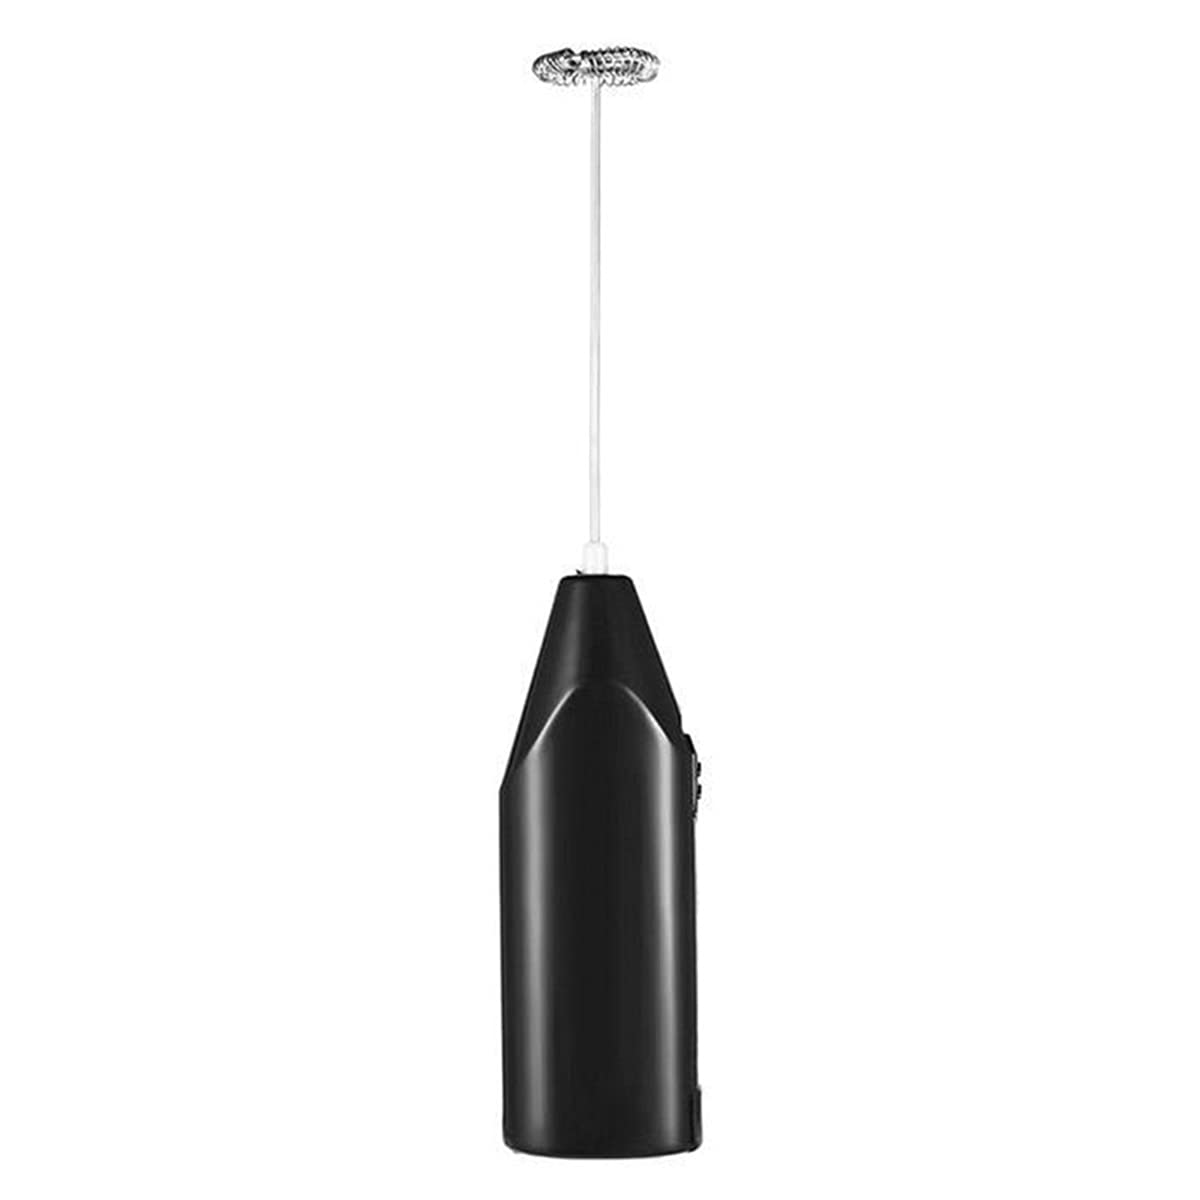 Portable Milk Frother for Lattes - Handheld Coffee Foam Maker for Espresso, Cappuccino, Hot Chocolate - Durable Mini Drink Mixer with Sturdy Whisk (Black).